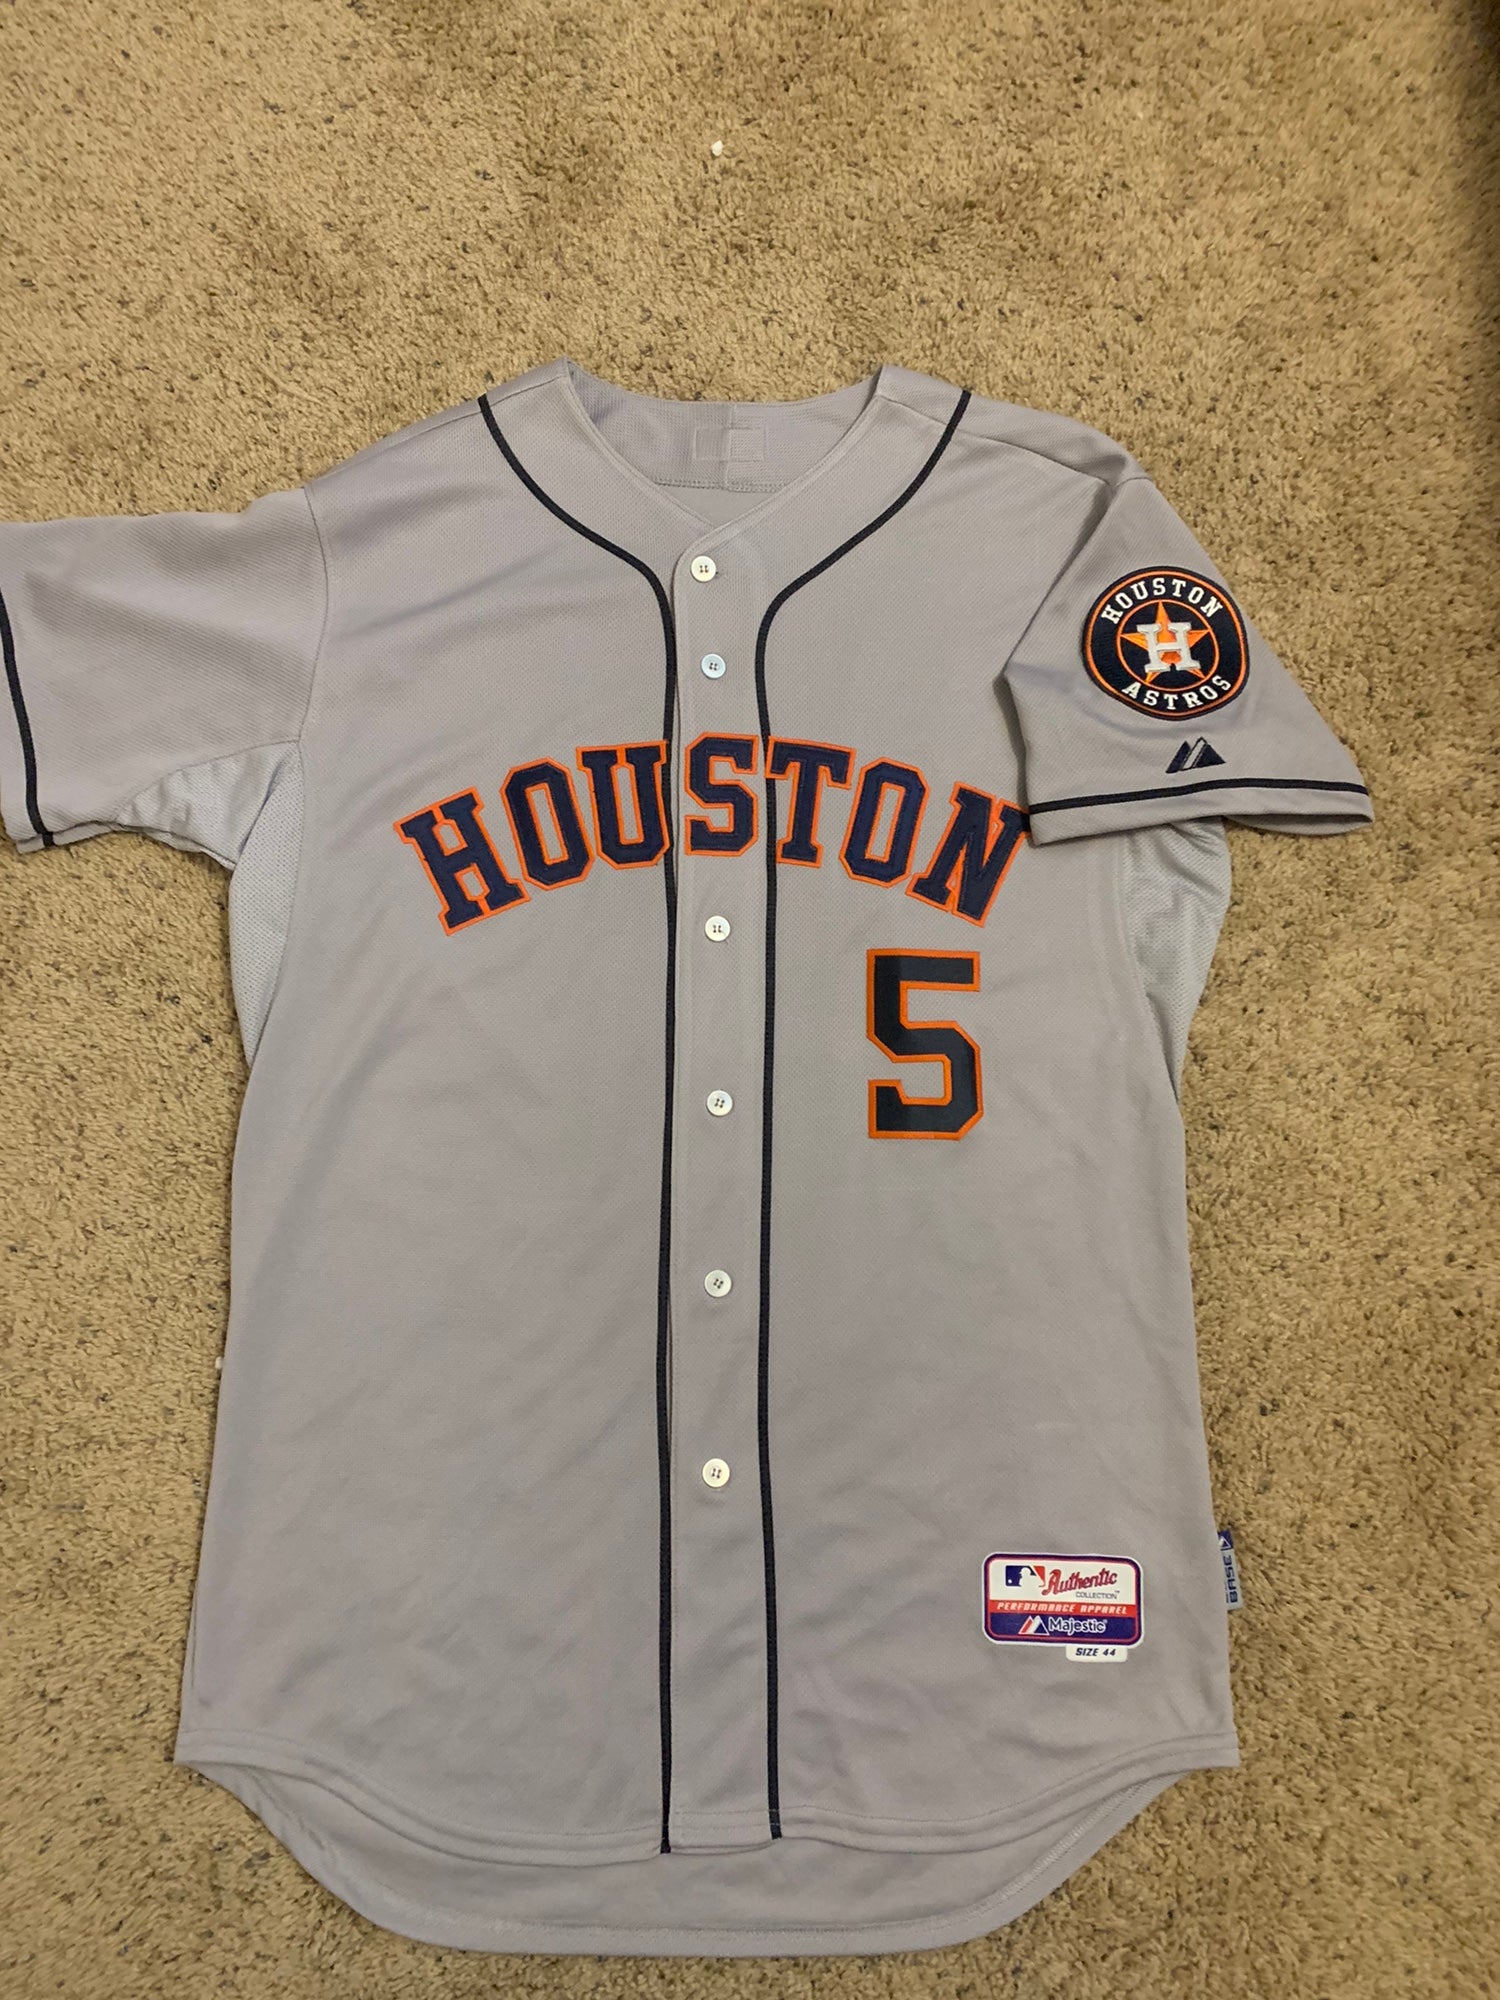 Authentic Jeff Bagwell Houston Astros 1991 Pullover Jersey - Shop